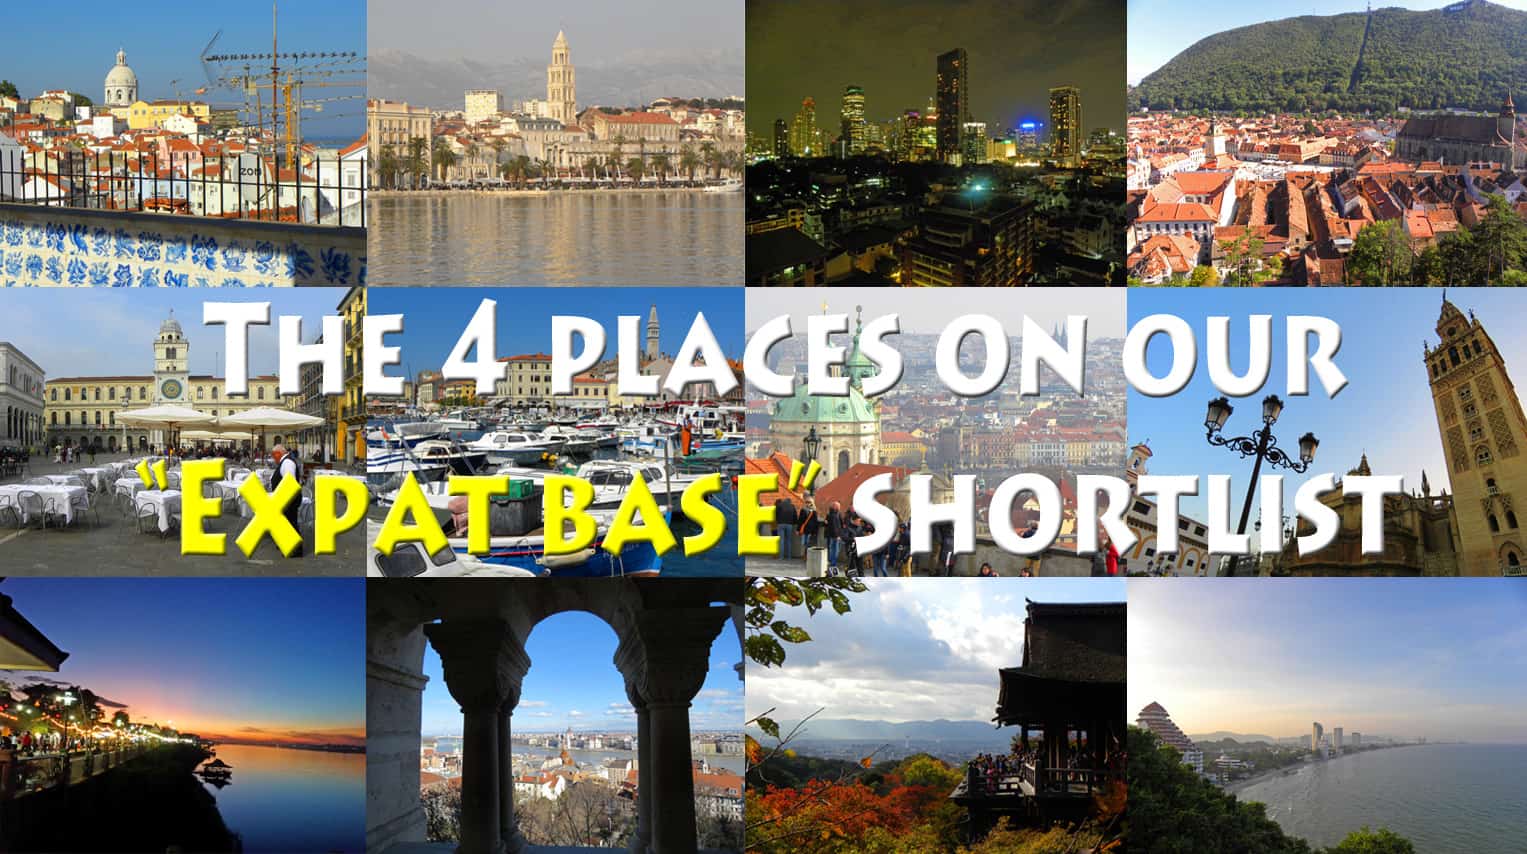 The 4 places on our “Expat base” shortlist